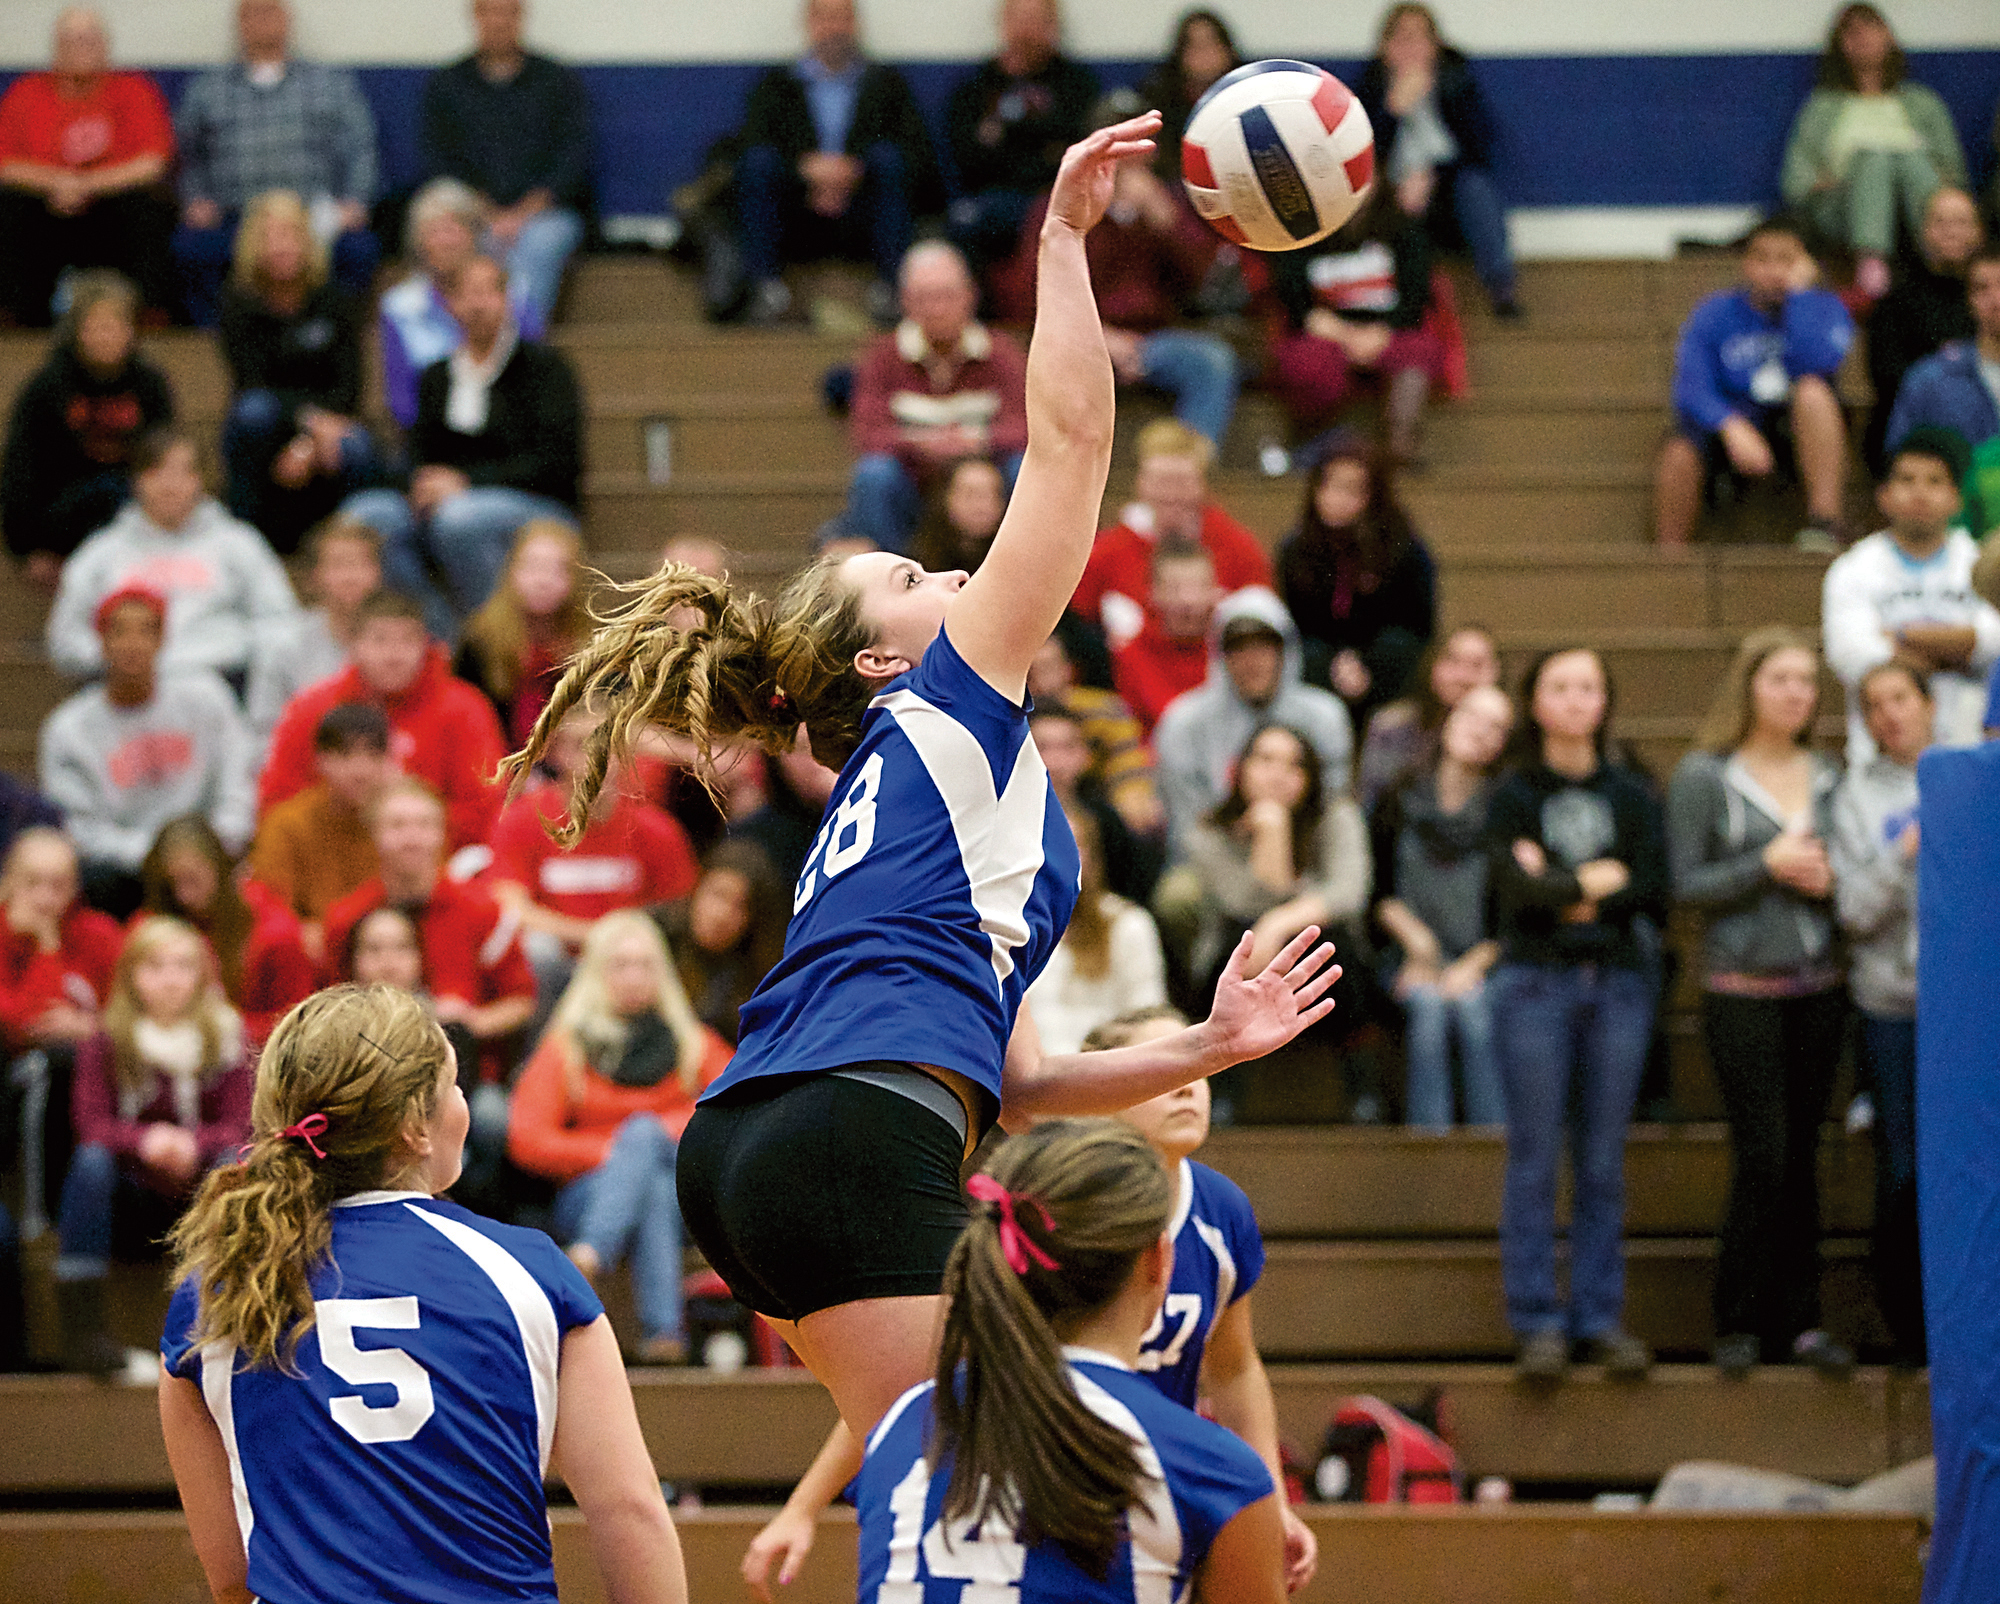 Teammates watch as Chimacum's Lauren Thacker spikes the ball during the Cowboys' home game against the Port Townsend Redskins. Chimacum beat its rival in three sets. Steve Mullensky/for Peninsula Daily News